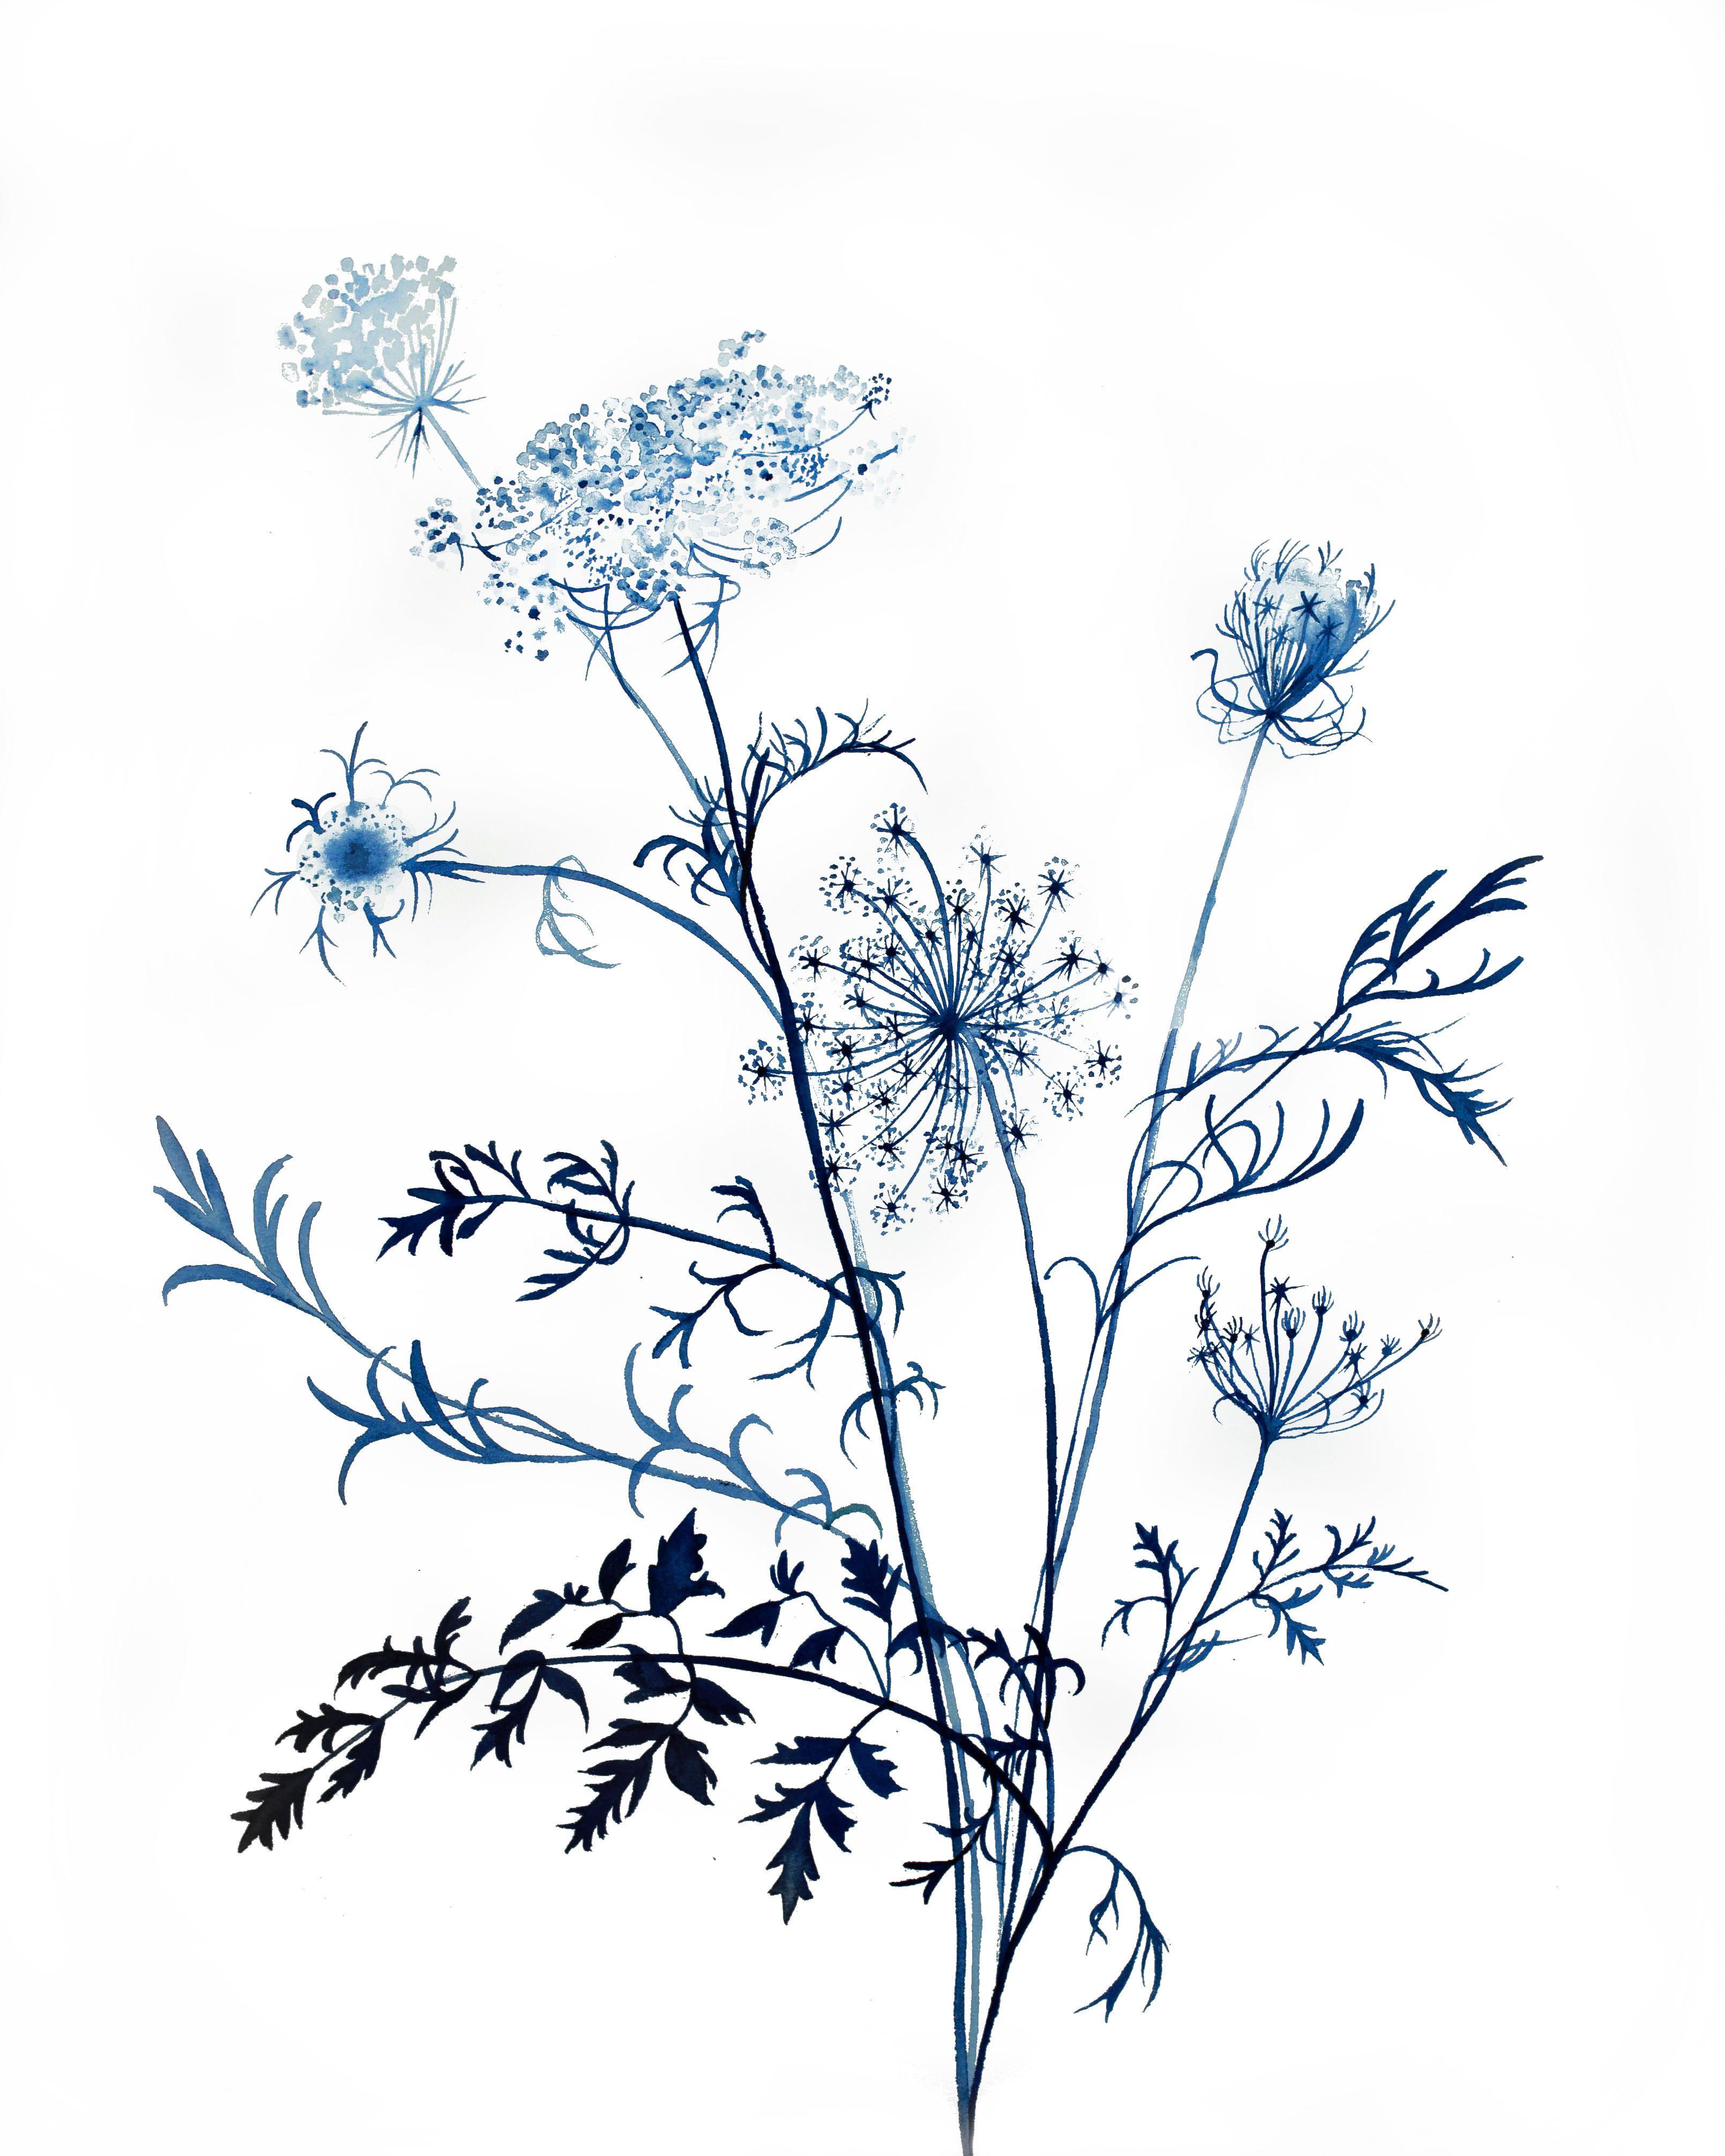 Queen Anne's Lace No. 11, Painting, Watercolor on Watercolor Paper - Art by Elizabeth Becker